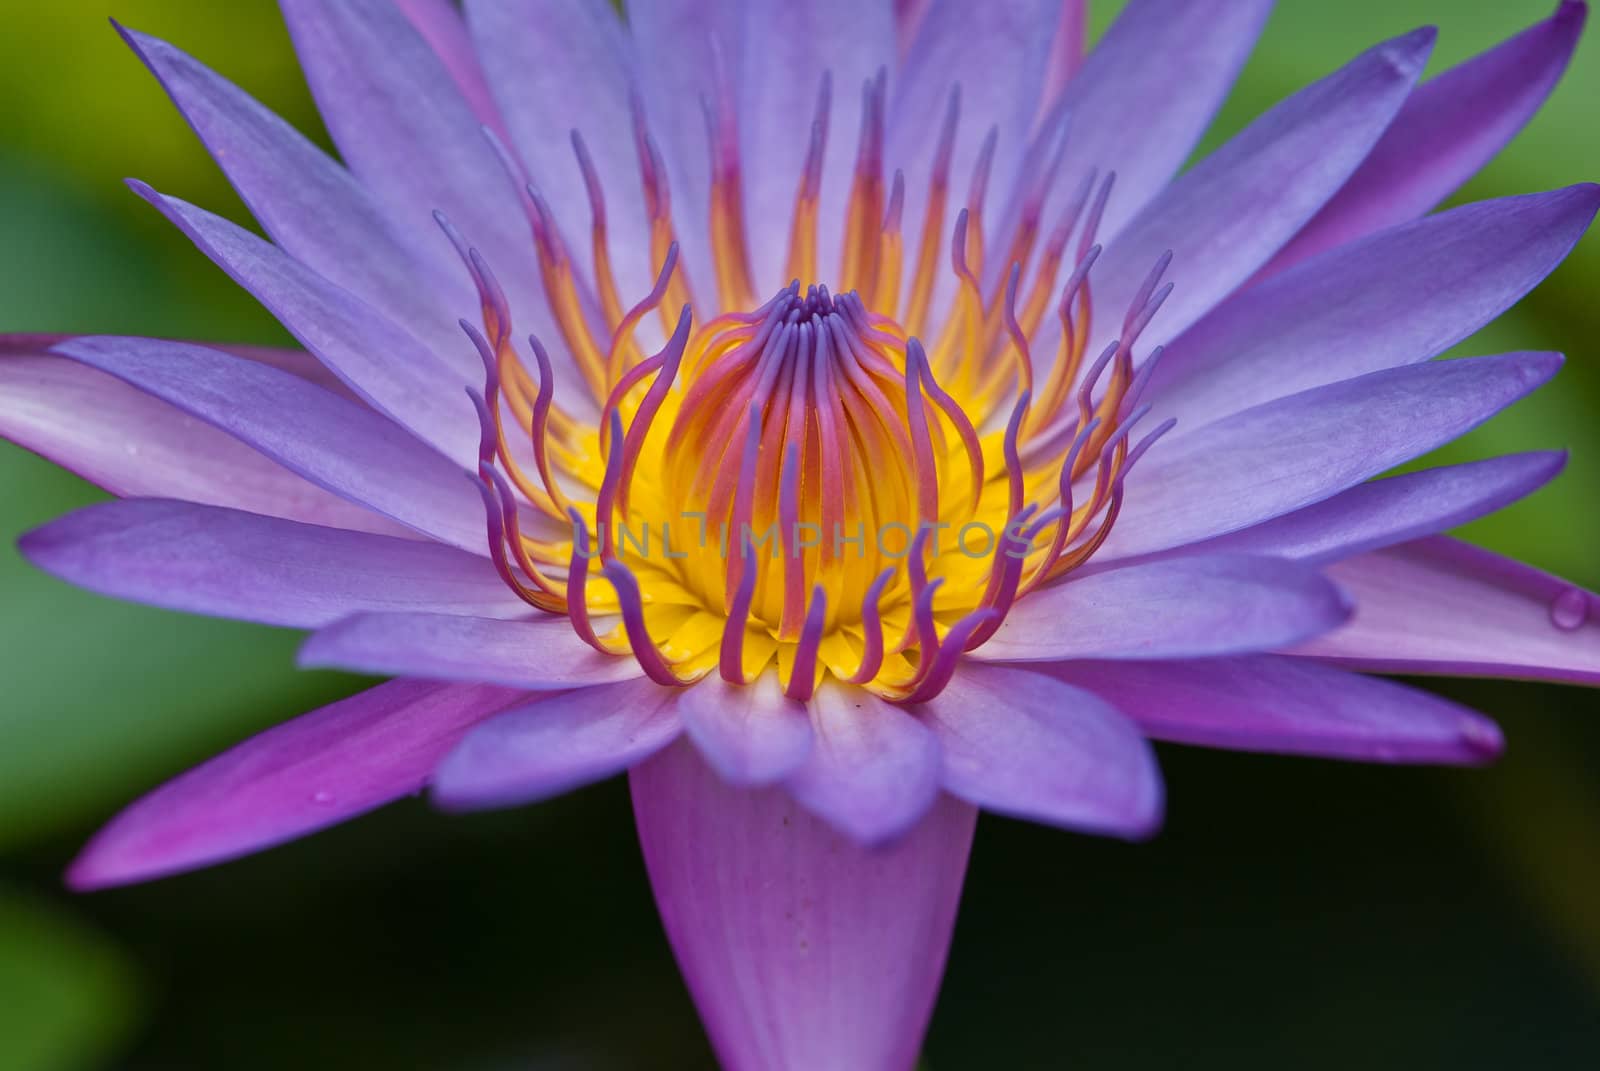 Bloomed purple water lily by sasilsolutions